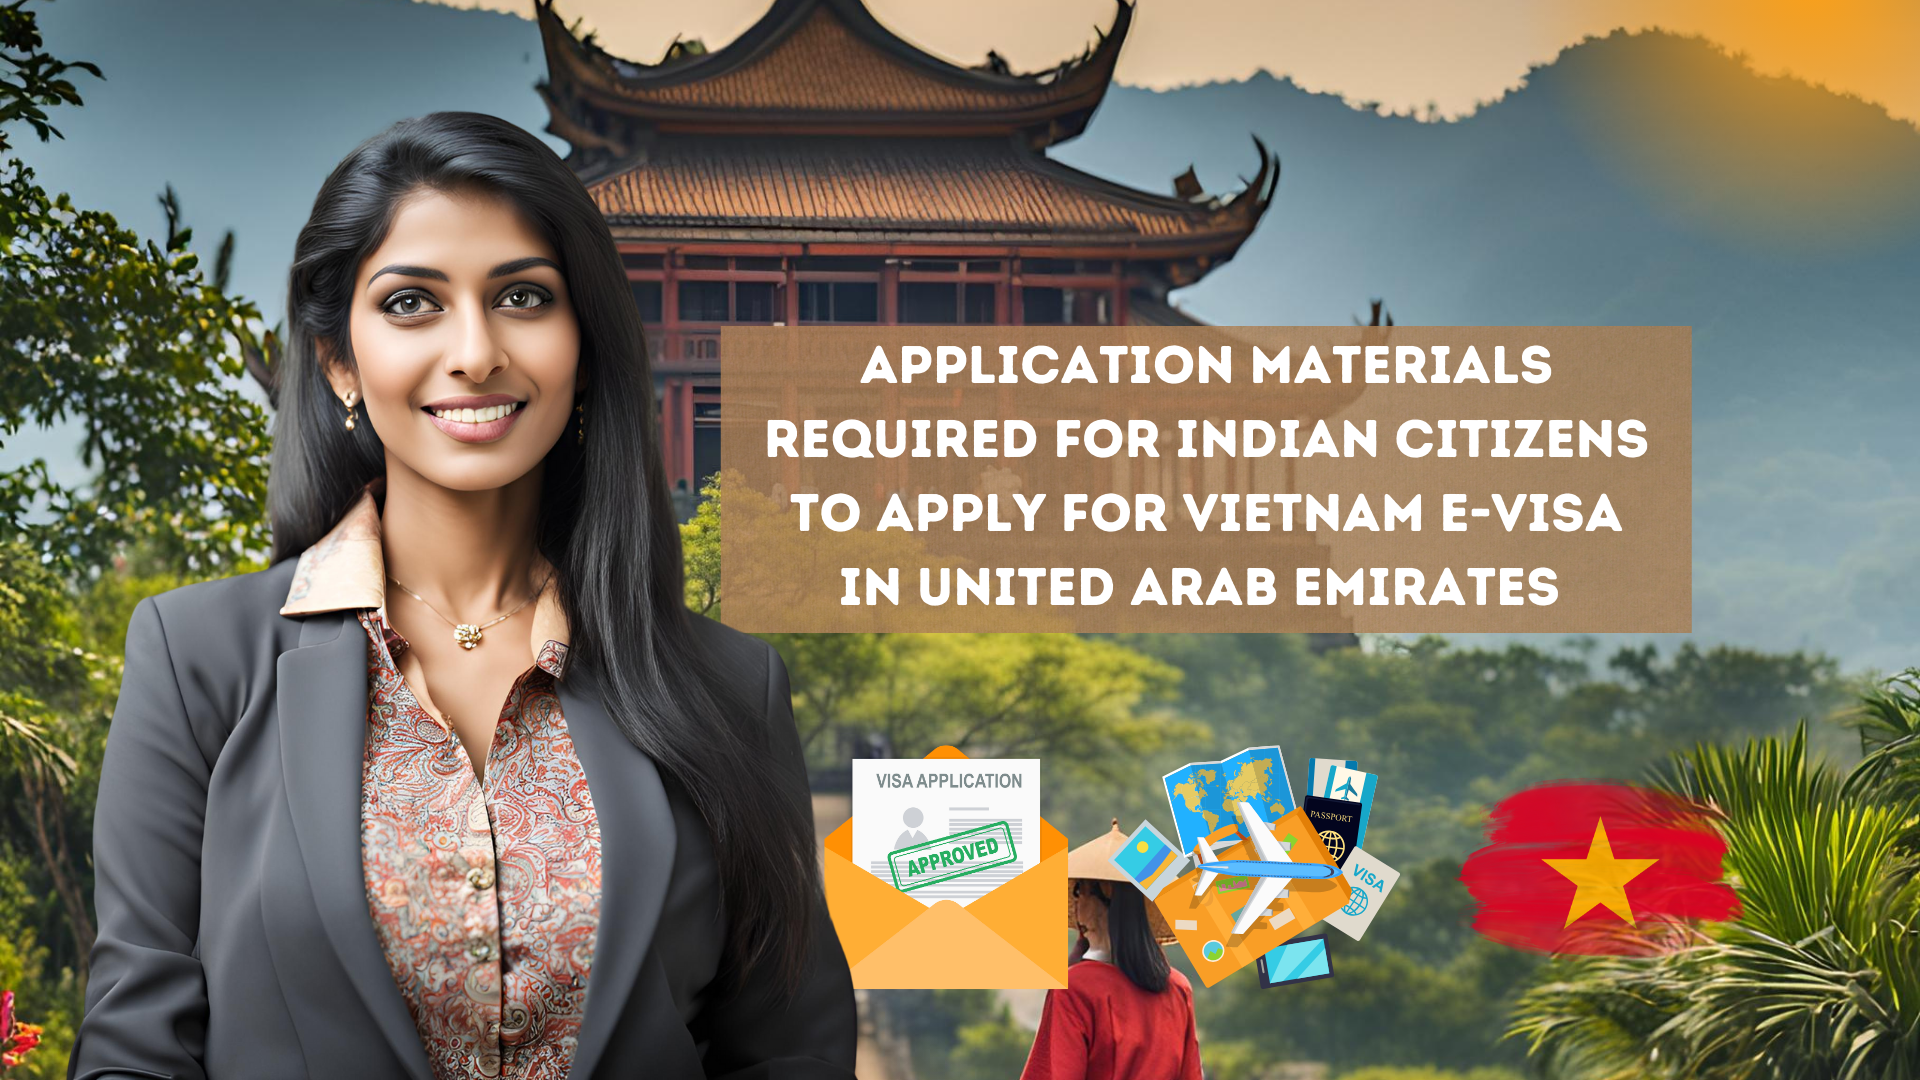 Application materials required for Indian citizens to apply for Vietnam e-visa in United Arab Emirates